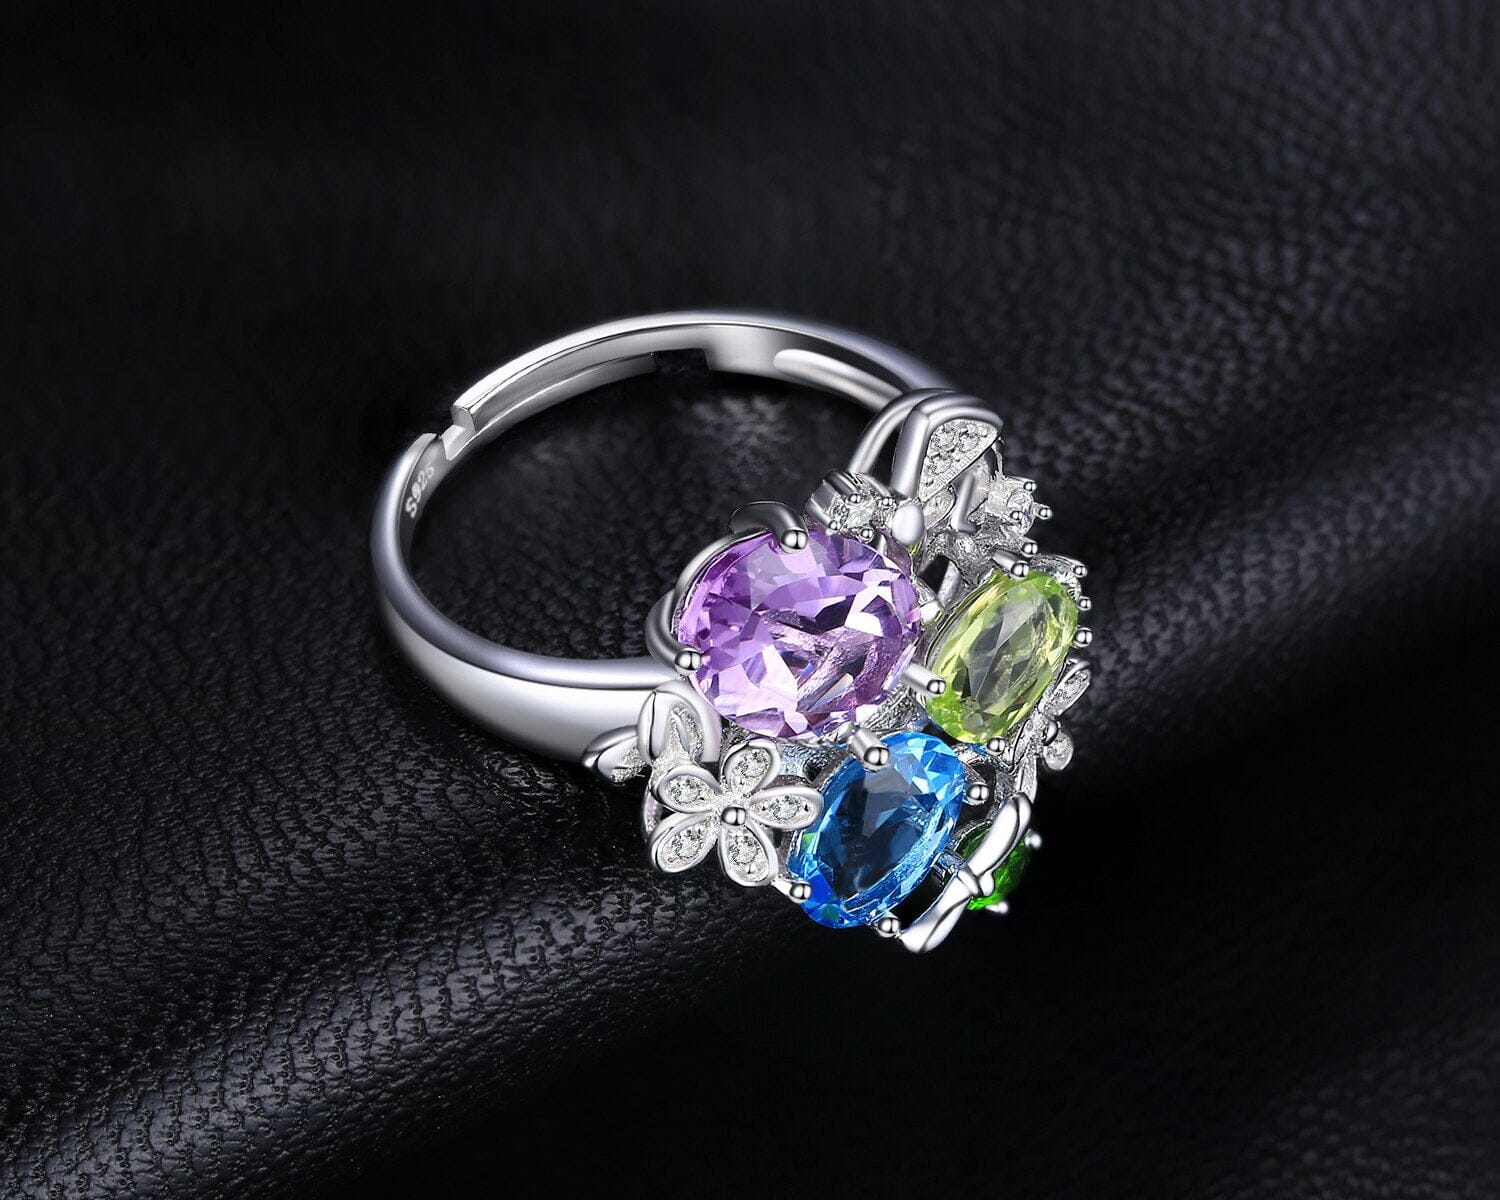 Flower Natural Amethyst Blue Topaz Peridot Chrome Diopside Open Adjustable Cocktail Ring-925 Sterling Silver WomenRing